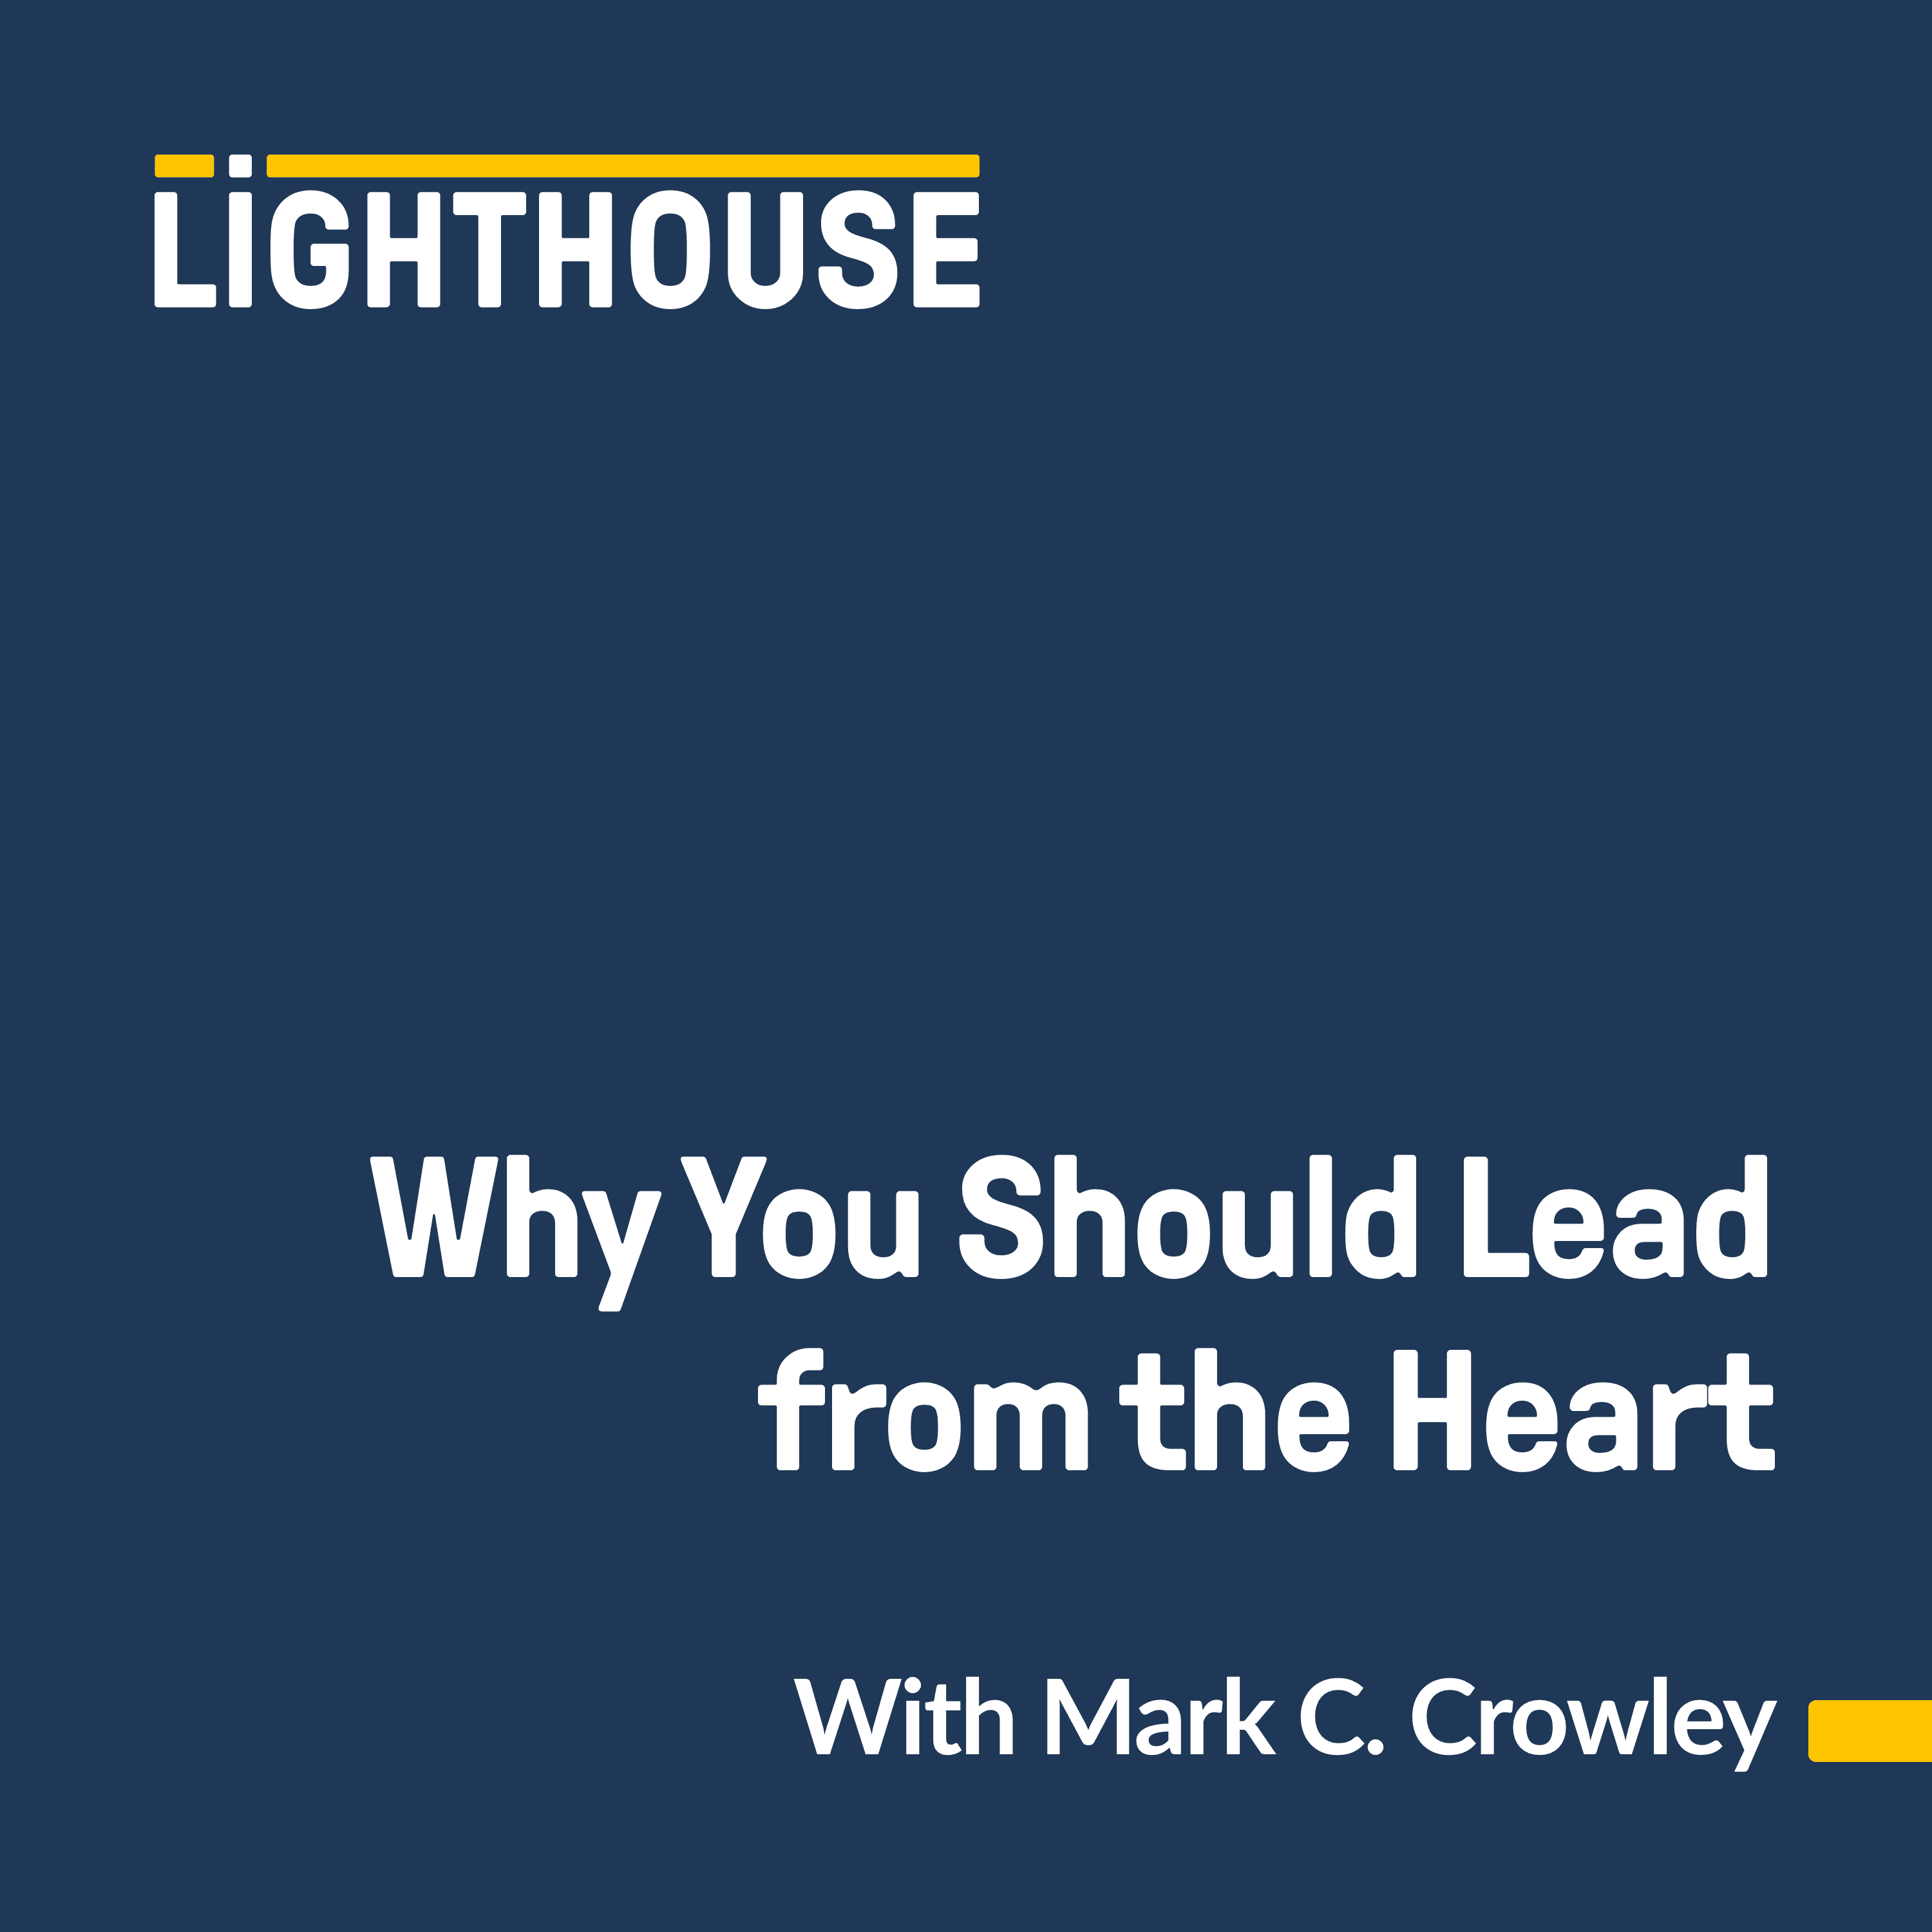 Why You Should Lead from the Heart